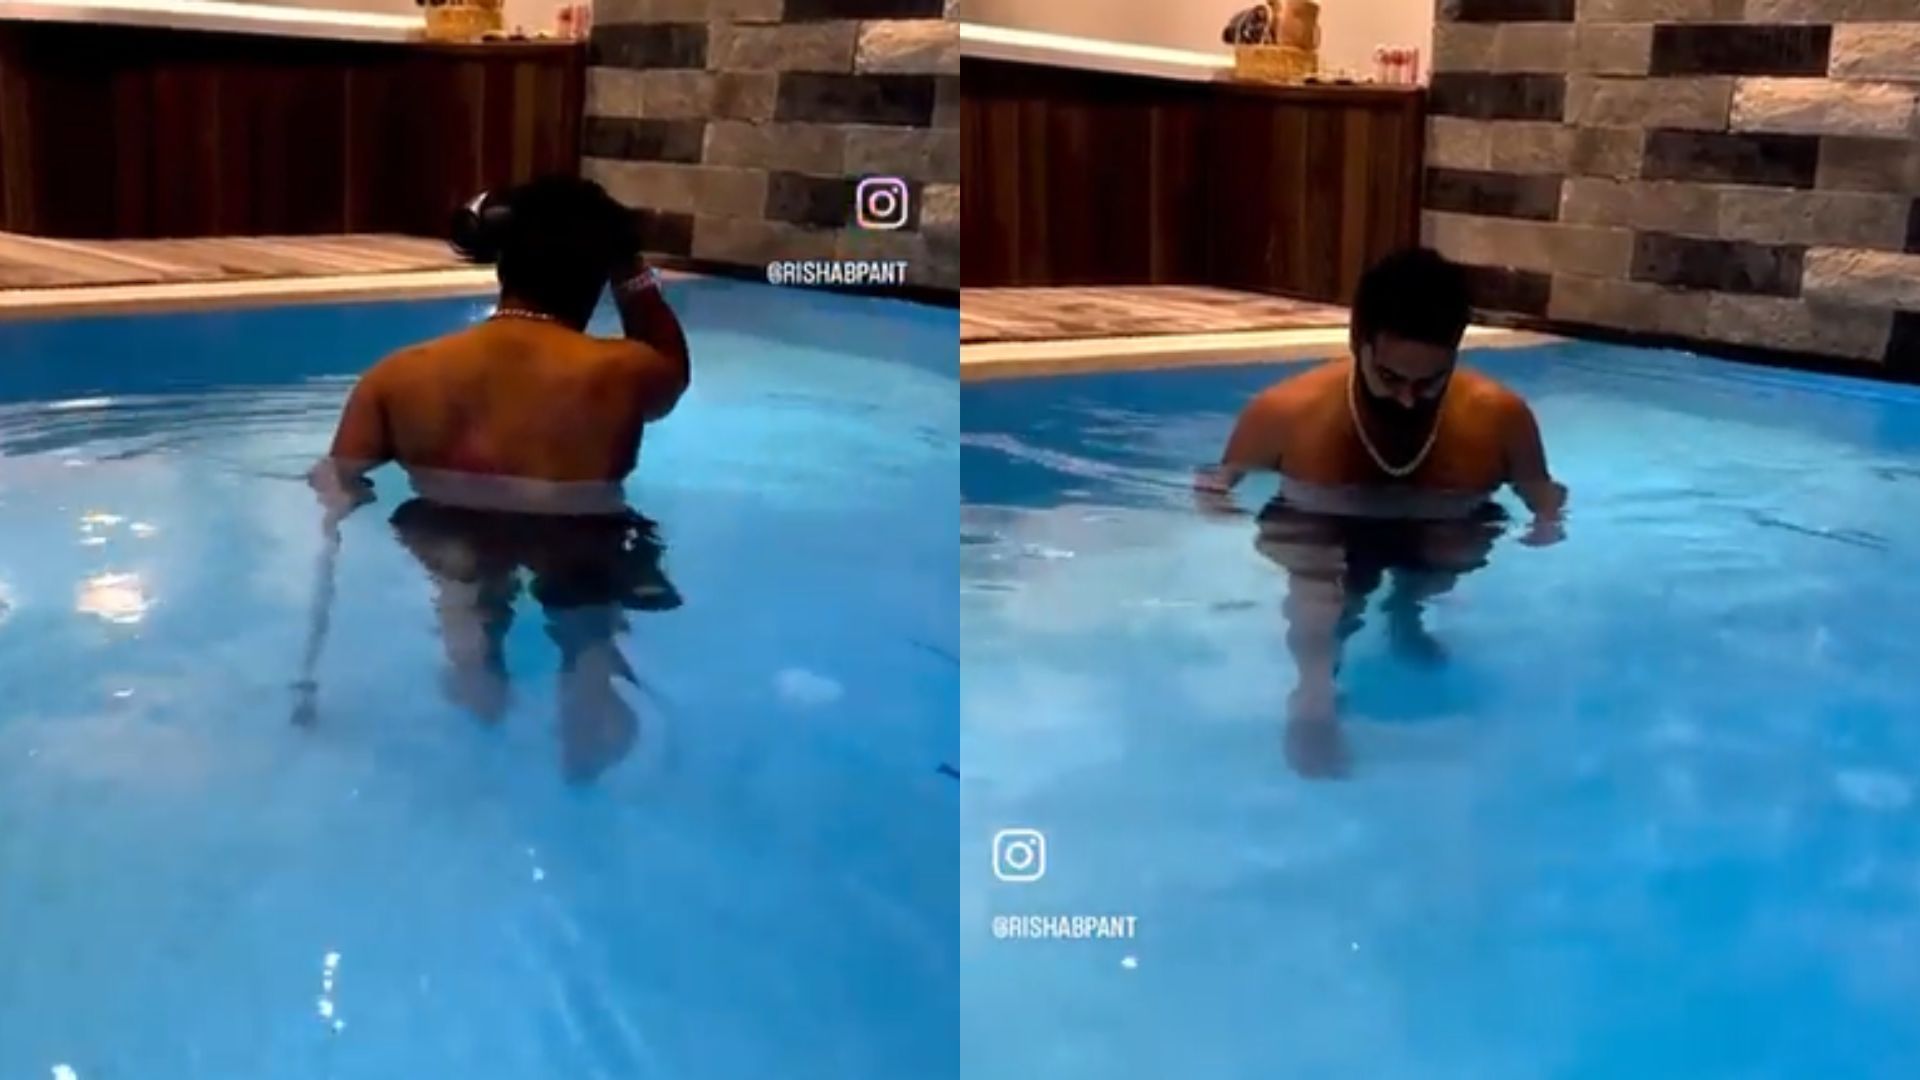 Snippets from video shared by Rishabh Pant on social media